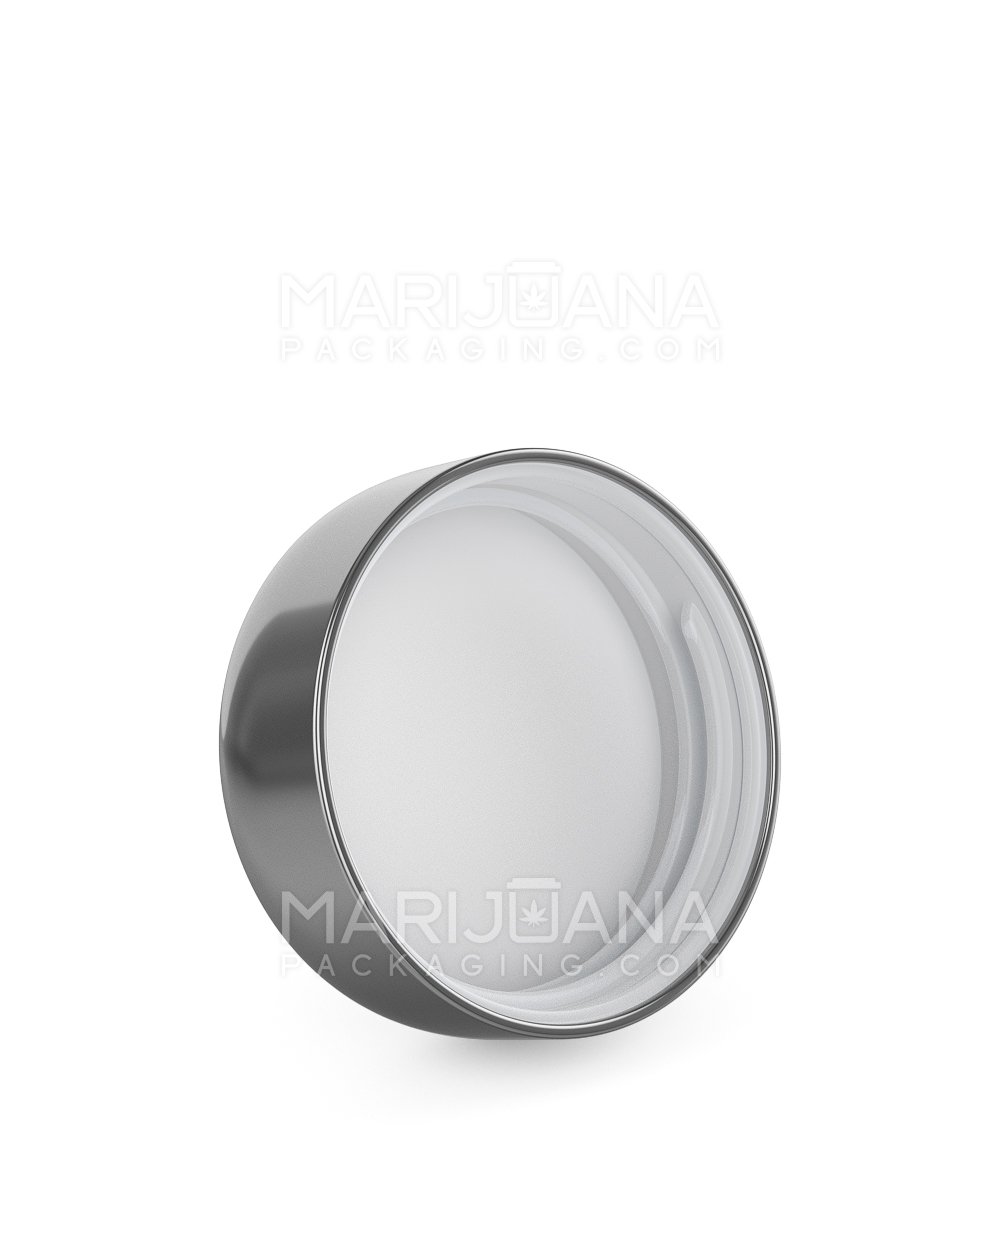 Child Resistant | Dome Push Down & Turn Plastic Caps w/ Foam Liner | 53mm - Glossy Silver - 120 Count - 2